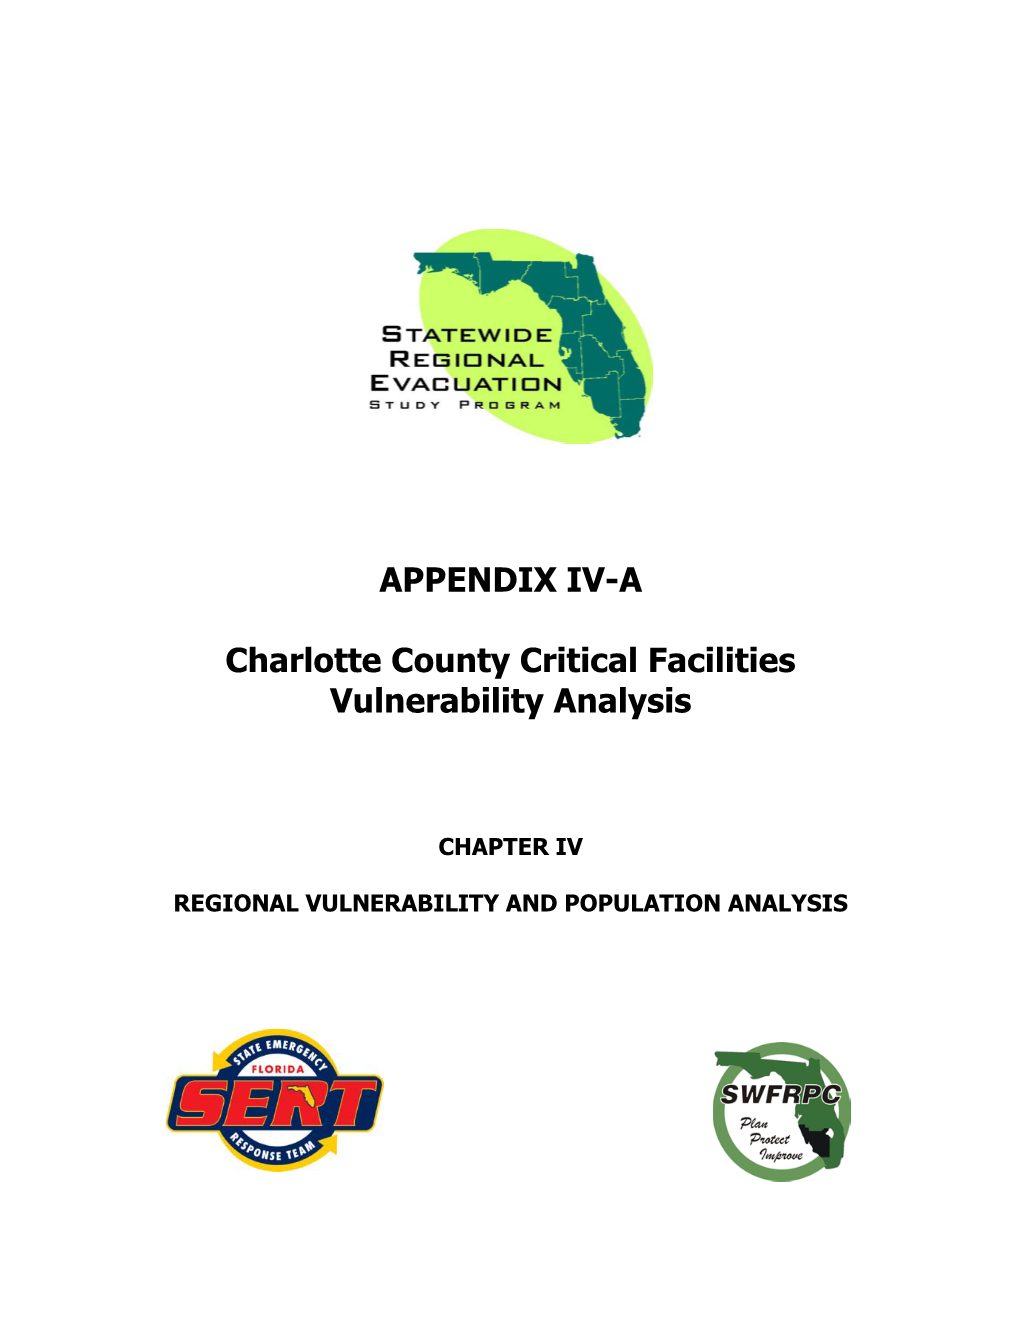 Charlotte County Critical Facilities Vulnerability Analysis